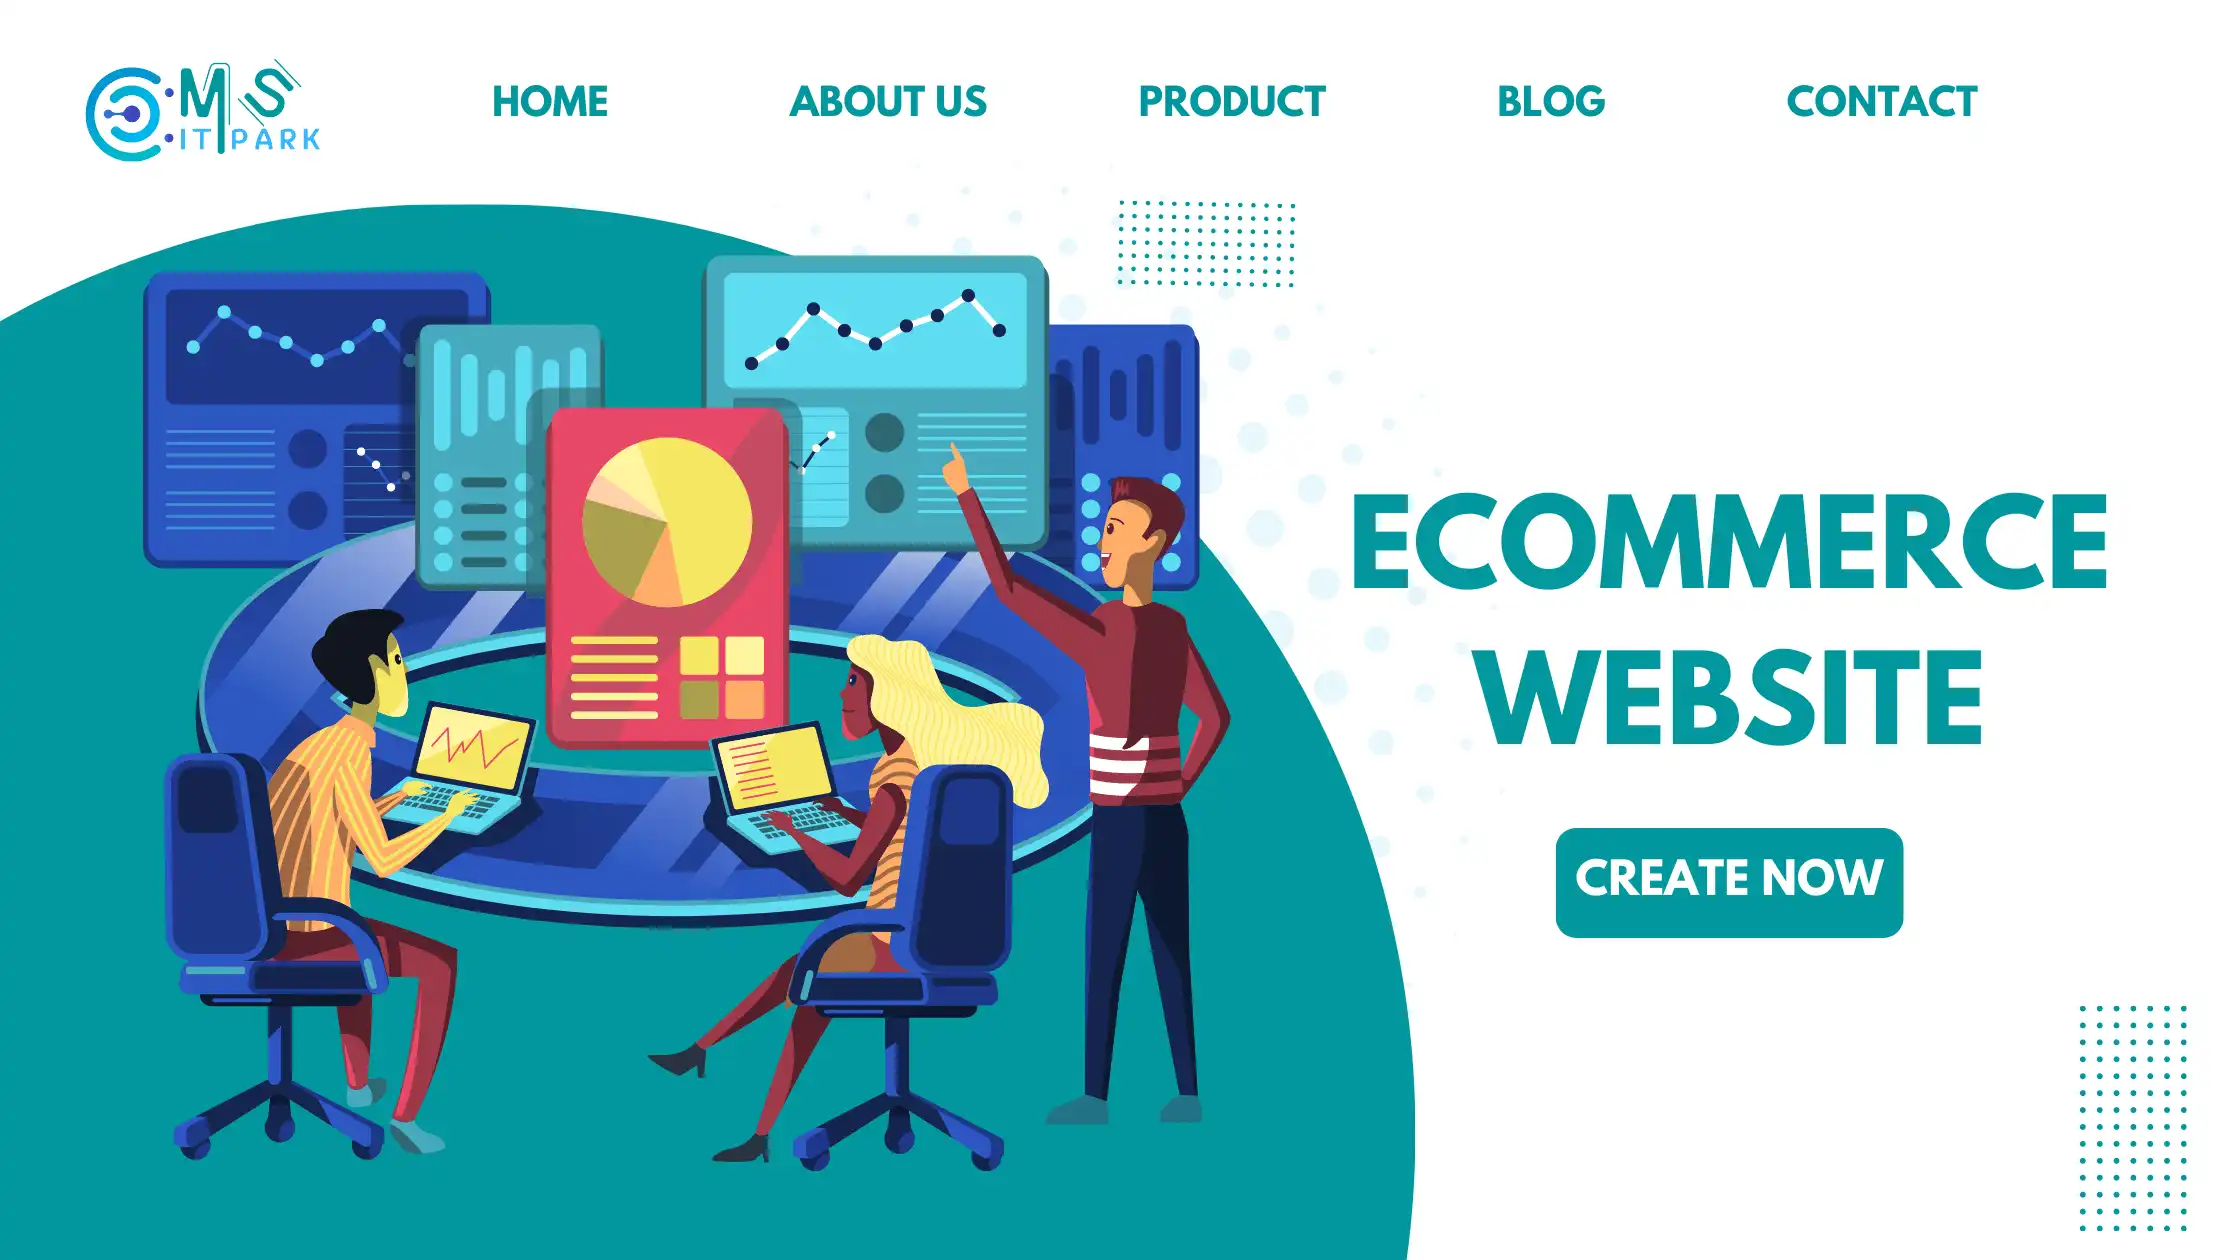 What is the Best Framework for an eCommerce Website?